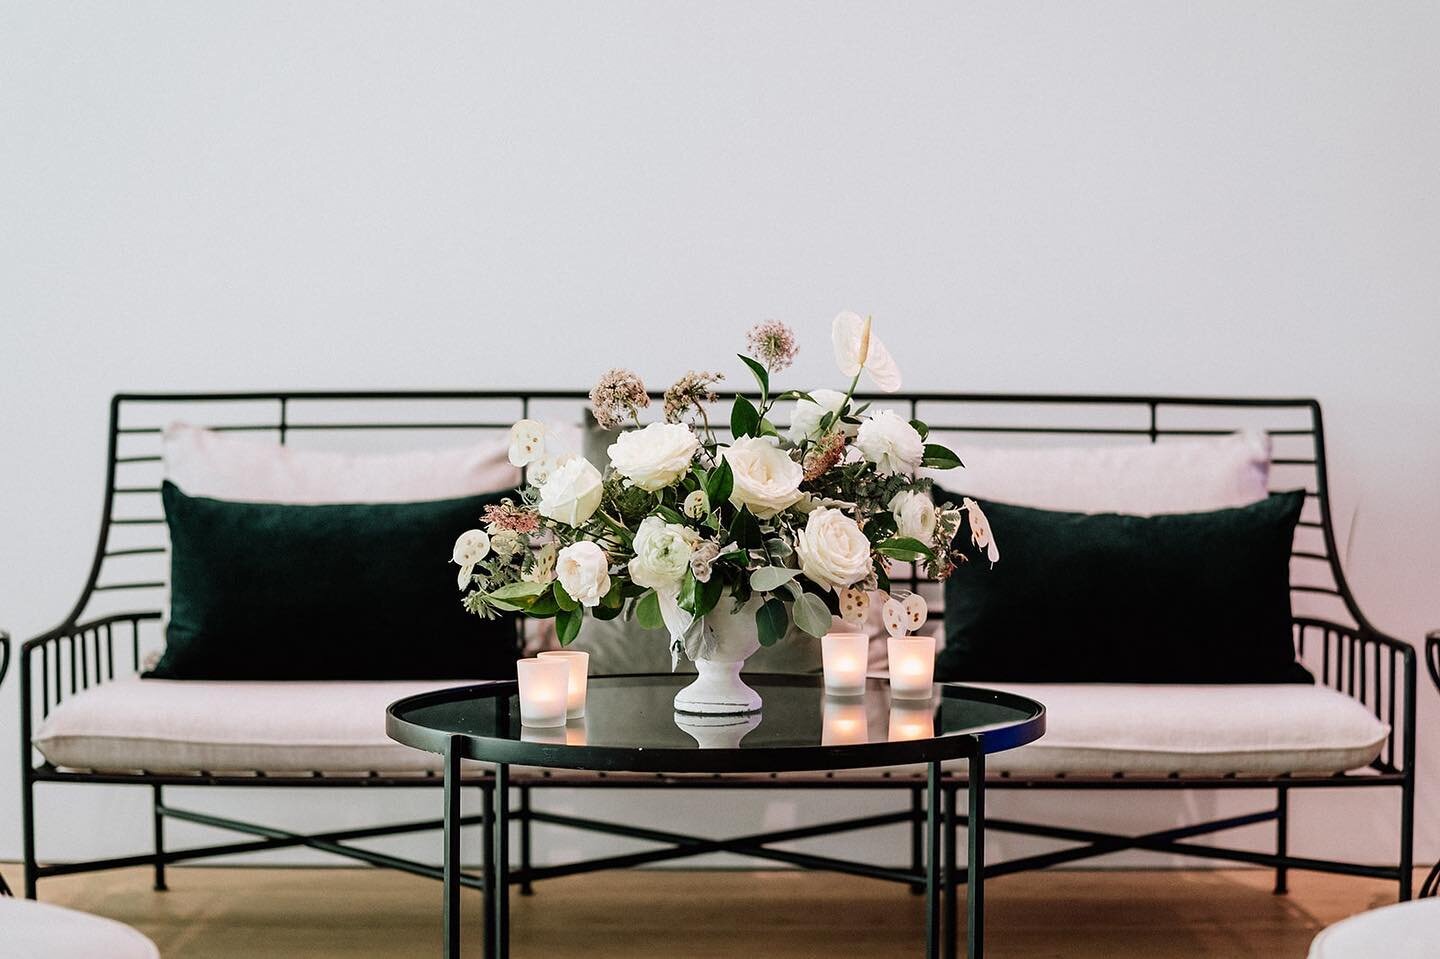 A bit of beauty to brighten your Saturday ✨ // Photo by: Steve @taralillyphotography 

Venue: @audainartmuseum 
Planner: @pocketfulproductions 
Florals: @ninebark_floral_design